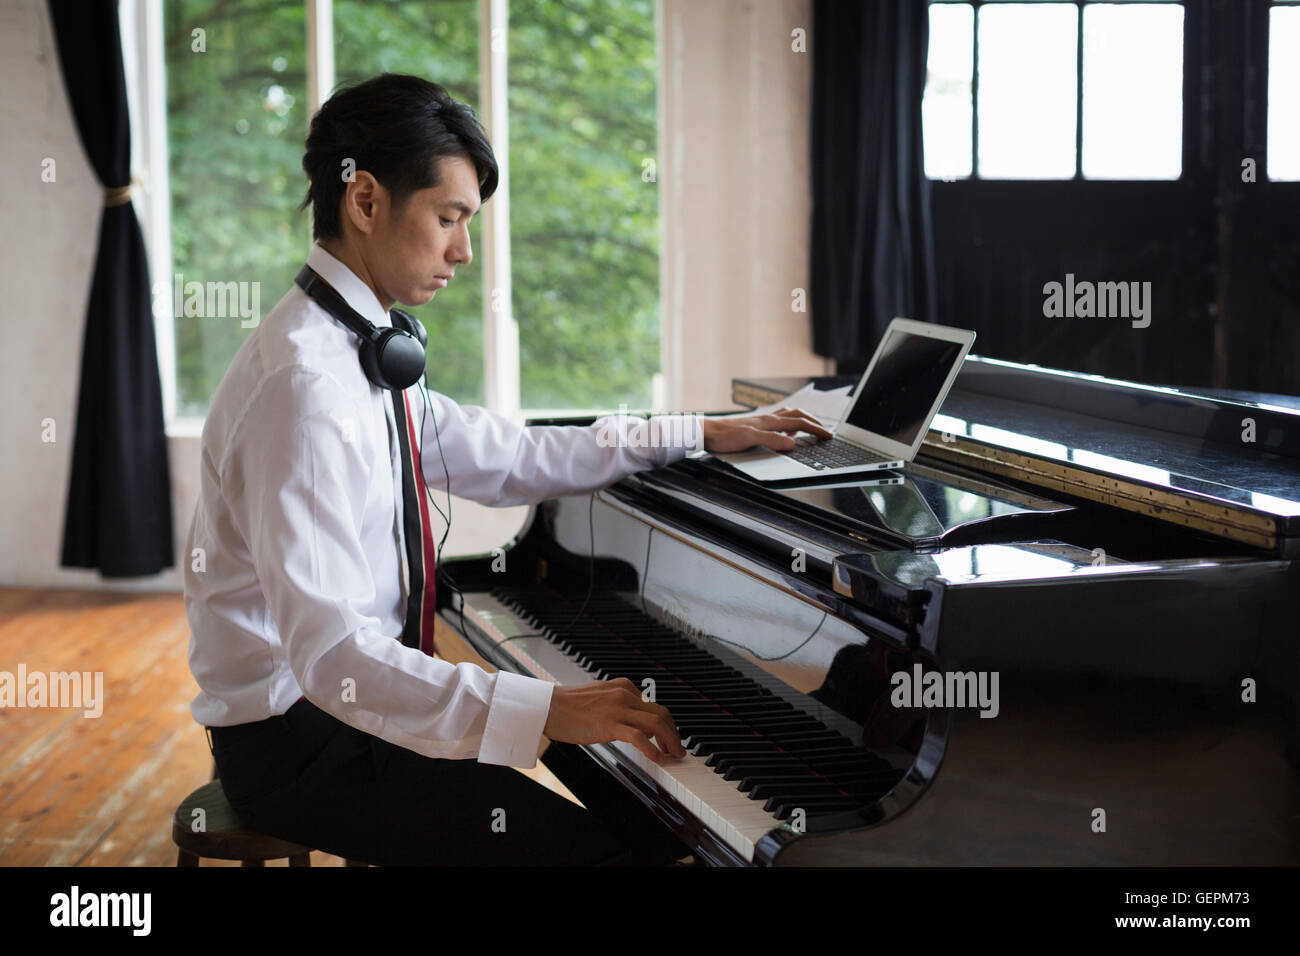 Young man sitting at a grand piano in a rehearsal studio, playing and simultaneously using a laptop computer. Stock Photo